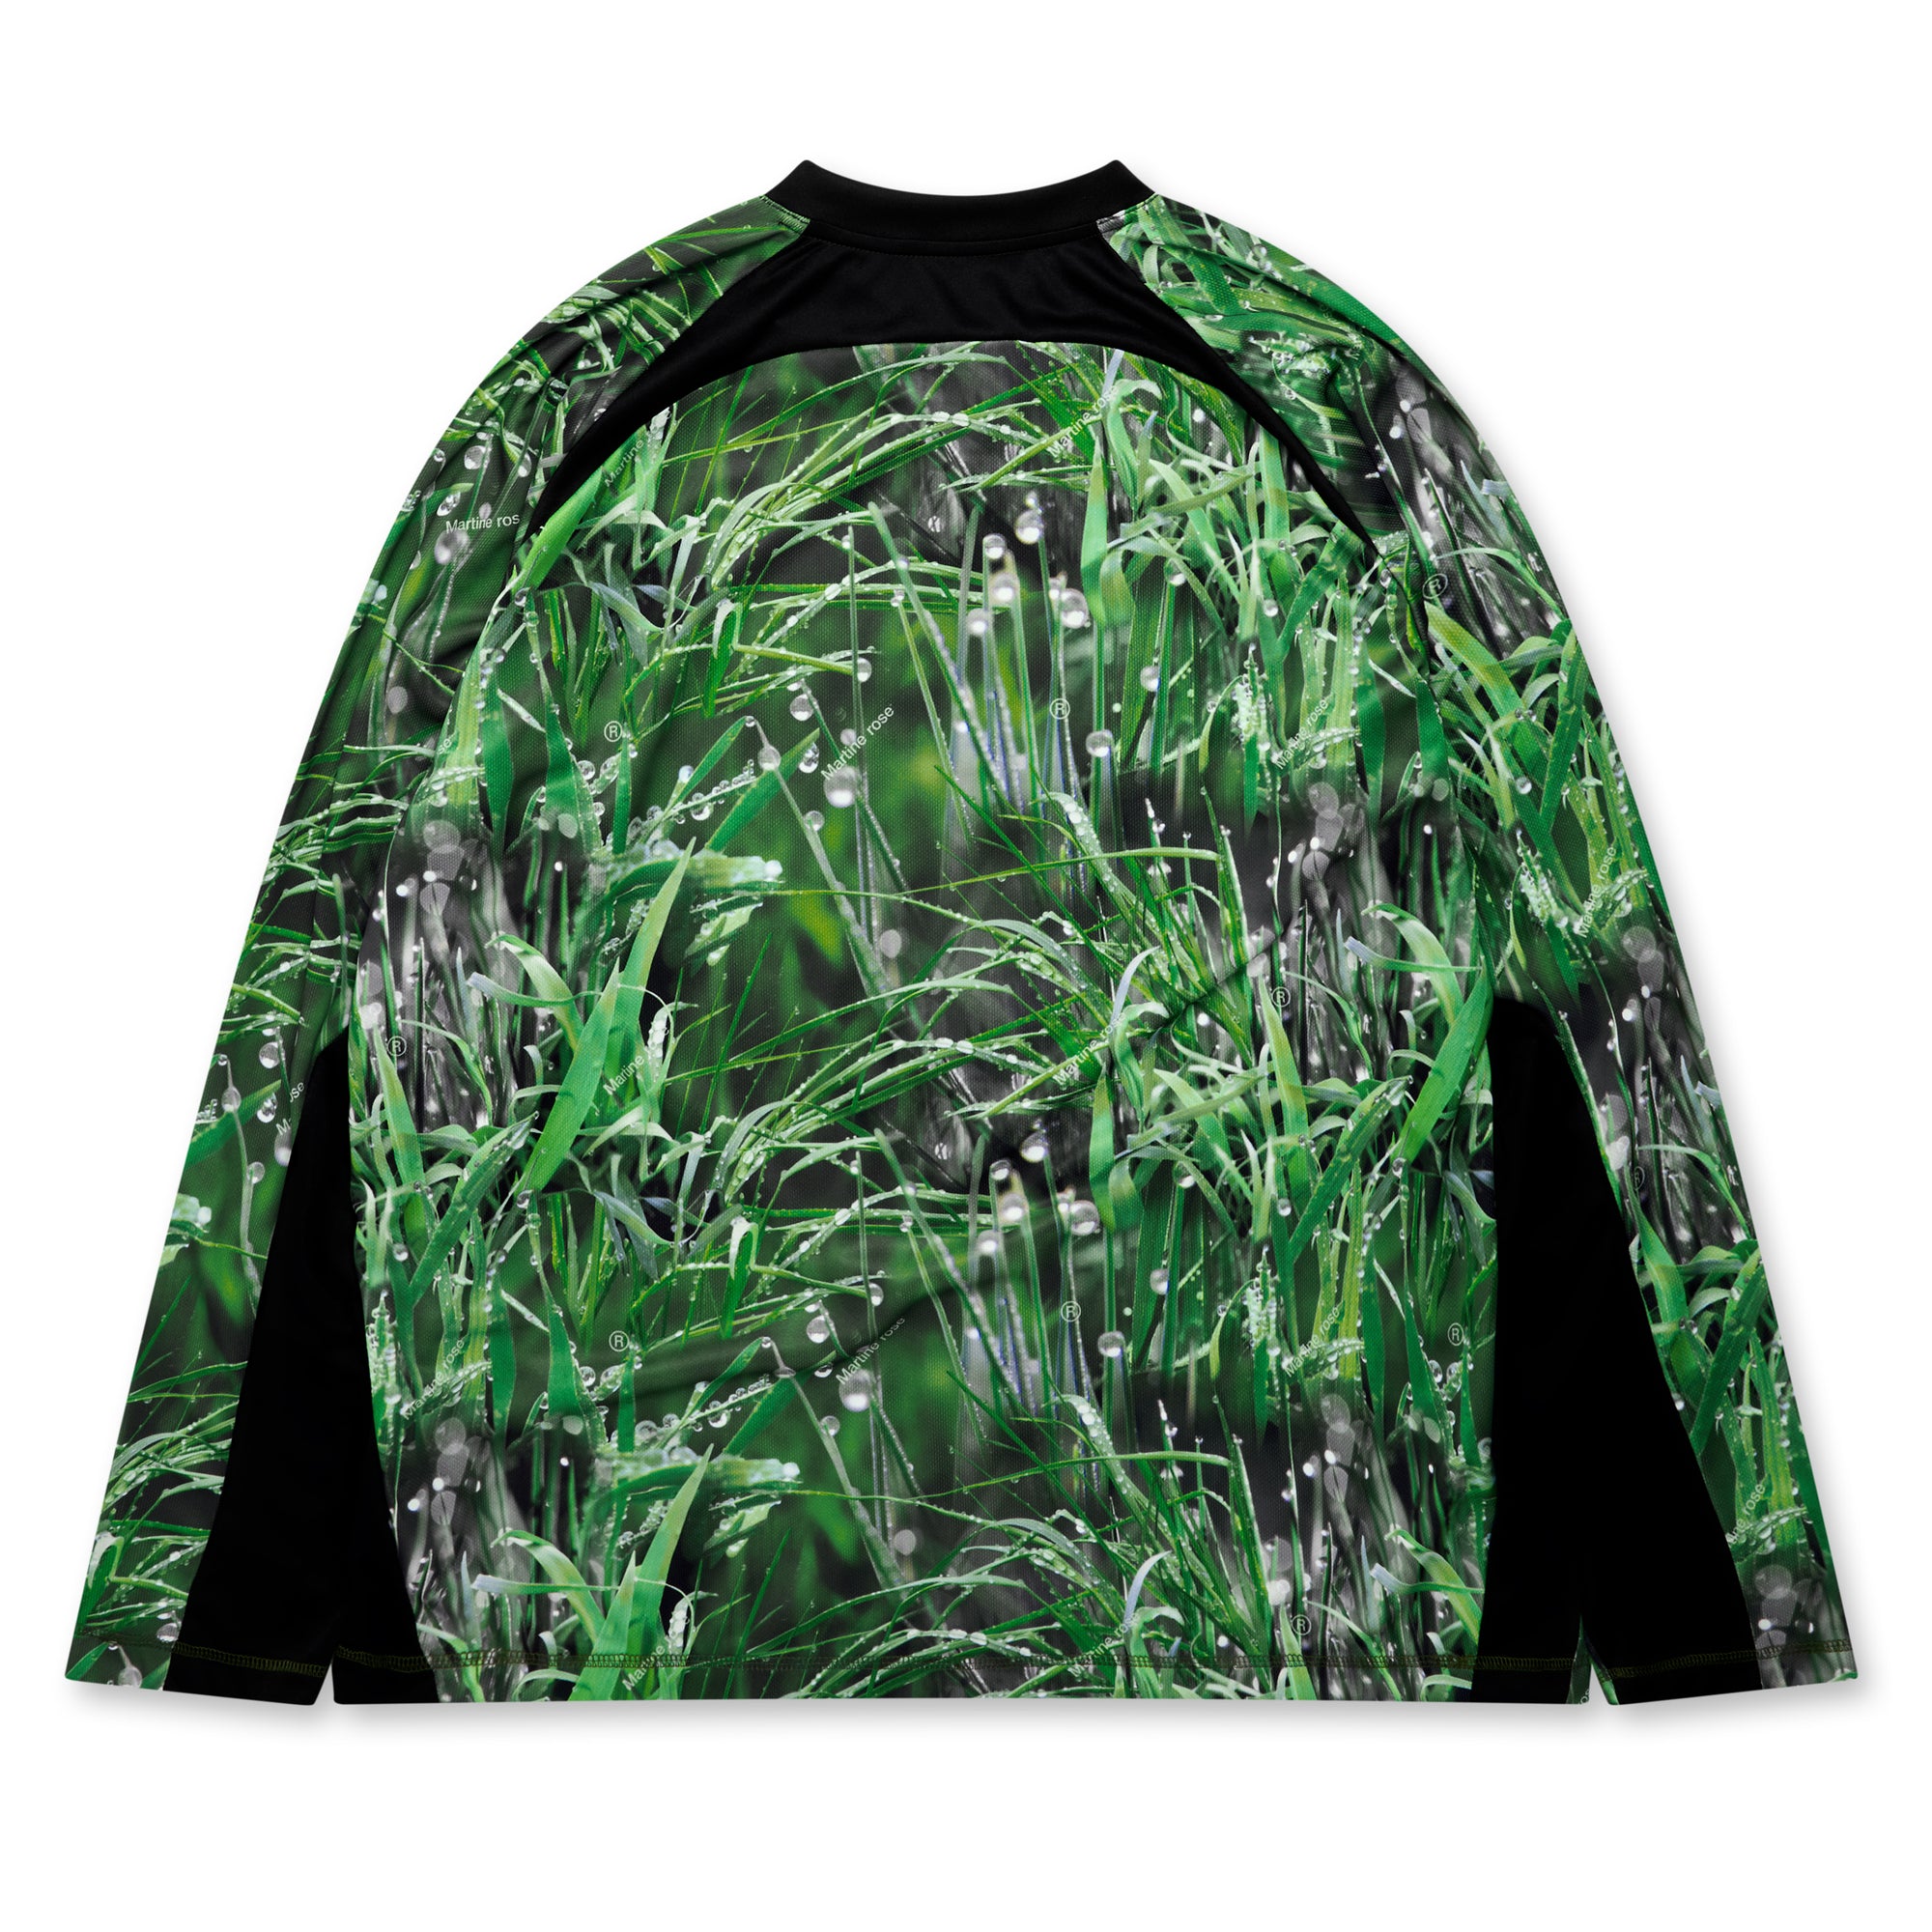 Martine Rose - Men’s Panelled Football Top - (Green) view 2